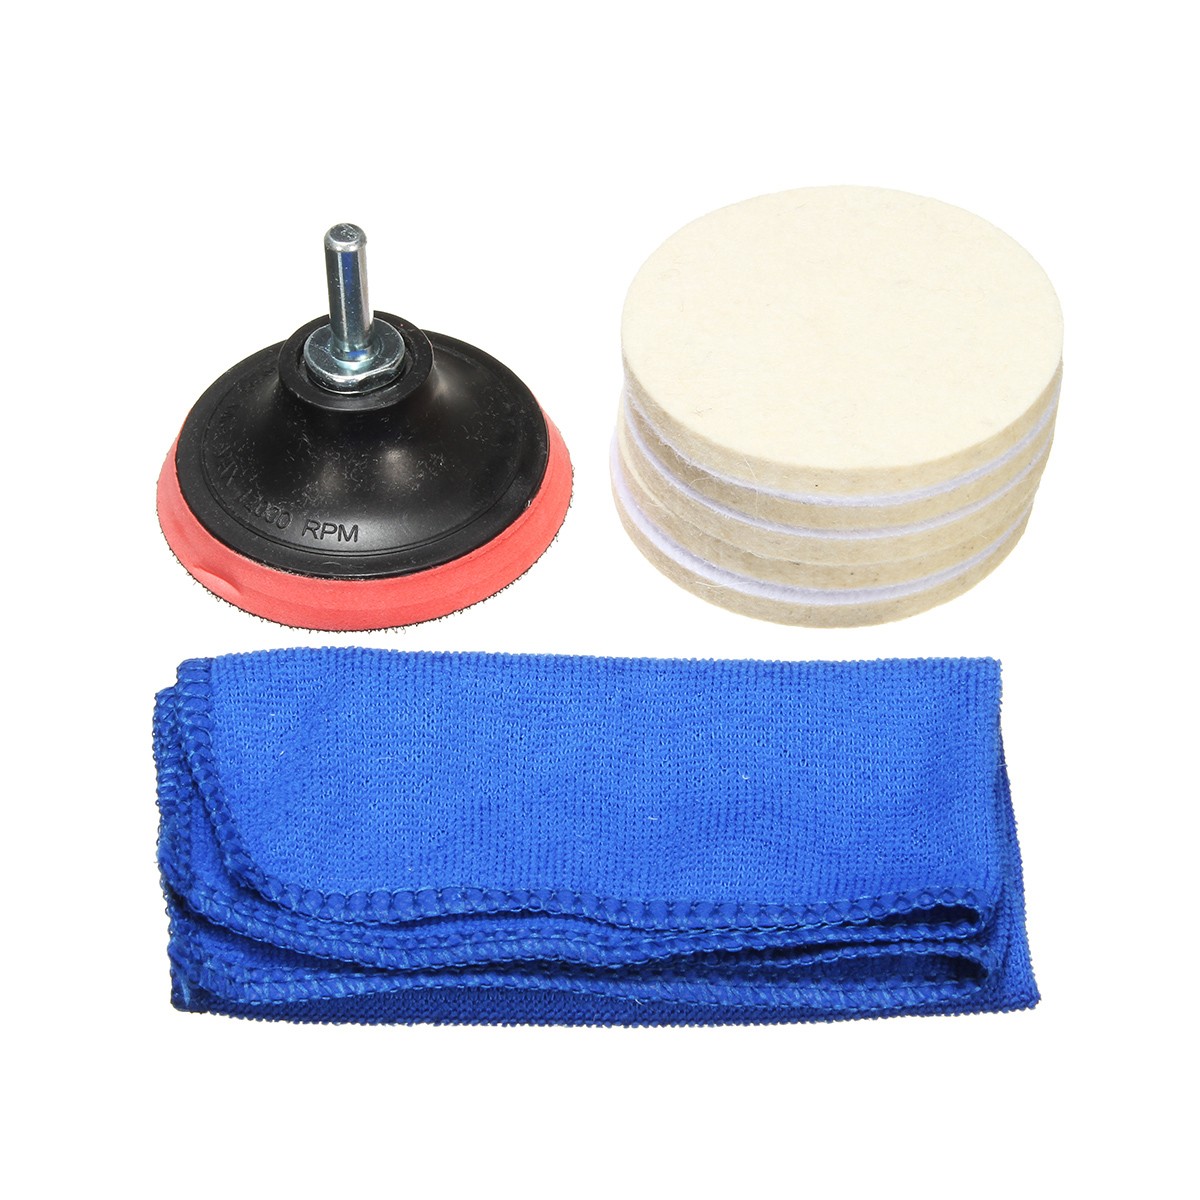 75mm-Glass-Polishing-Kit-for-Removing-Burrs-Rust-Dust-Remove-the-Oxide-Layer-Coating-1940454-2